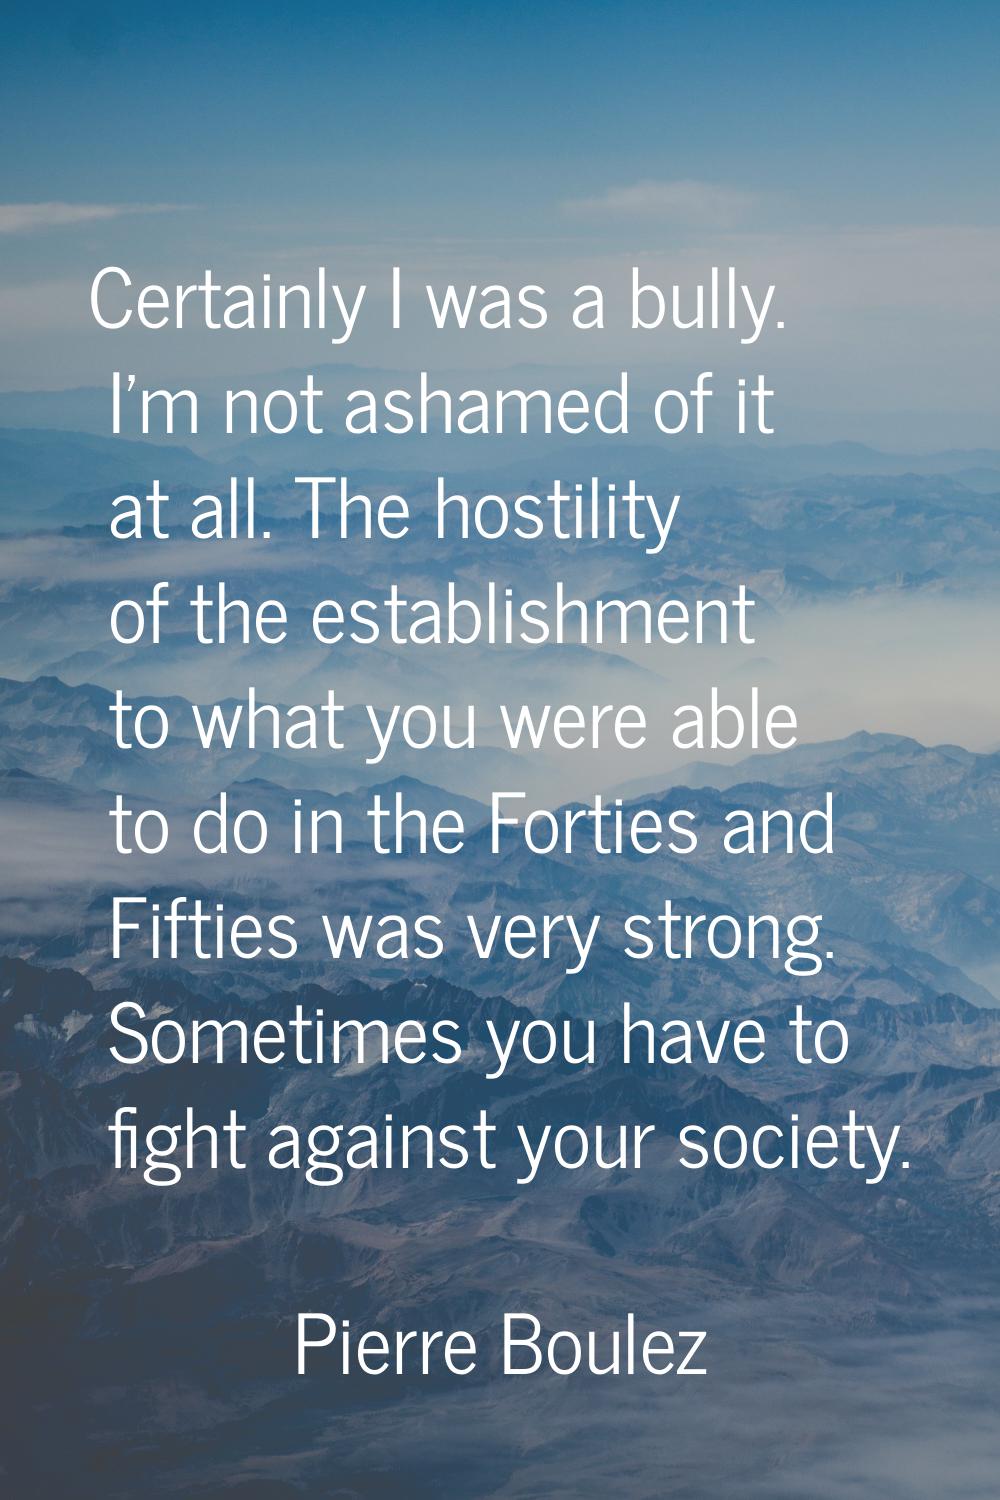 Certainly I was a bully. I'm not ashamed of it at all. The hostility of the establishment to what y